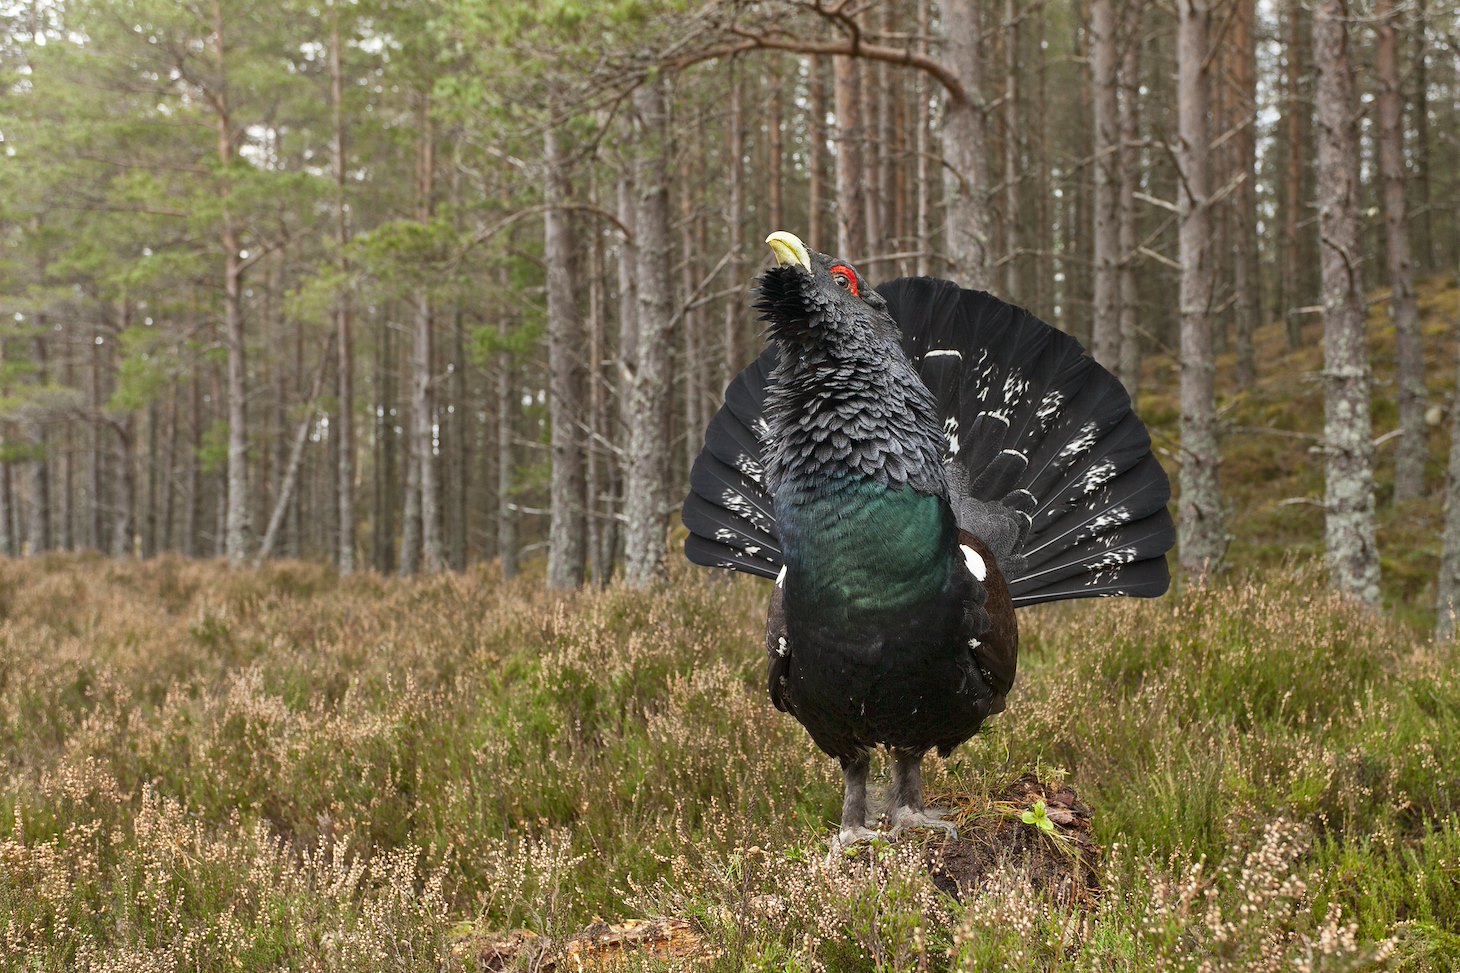 Capercaillie (Tetrao urogallus) adult male displaying in pine wodland, Cairngorms National Park, Scotland, UK